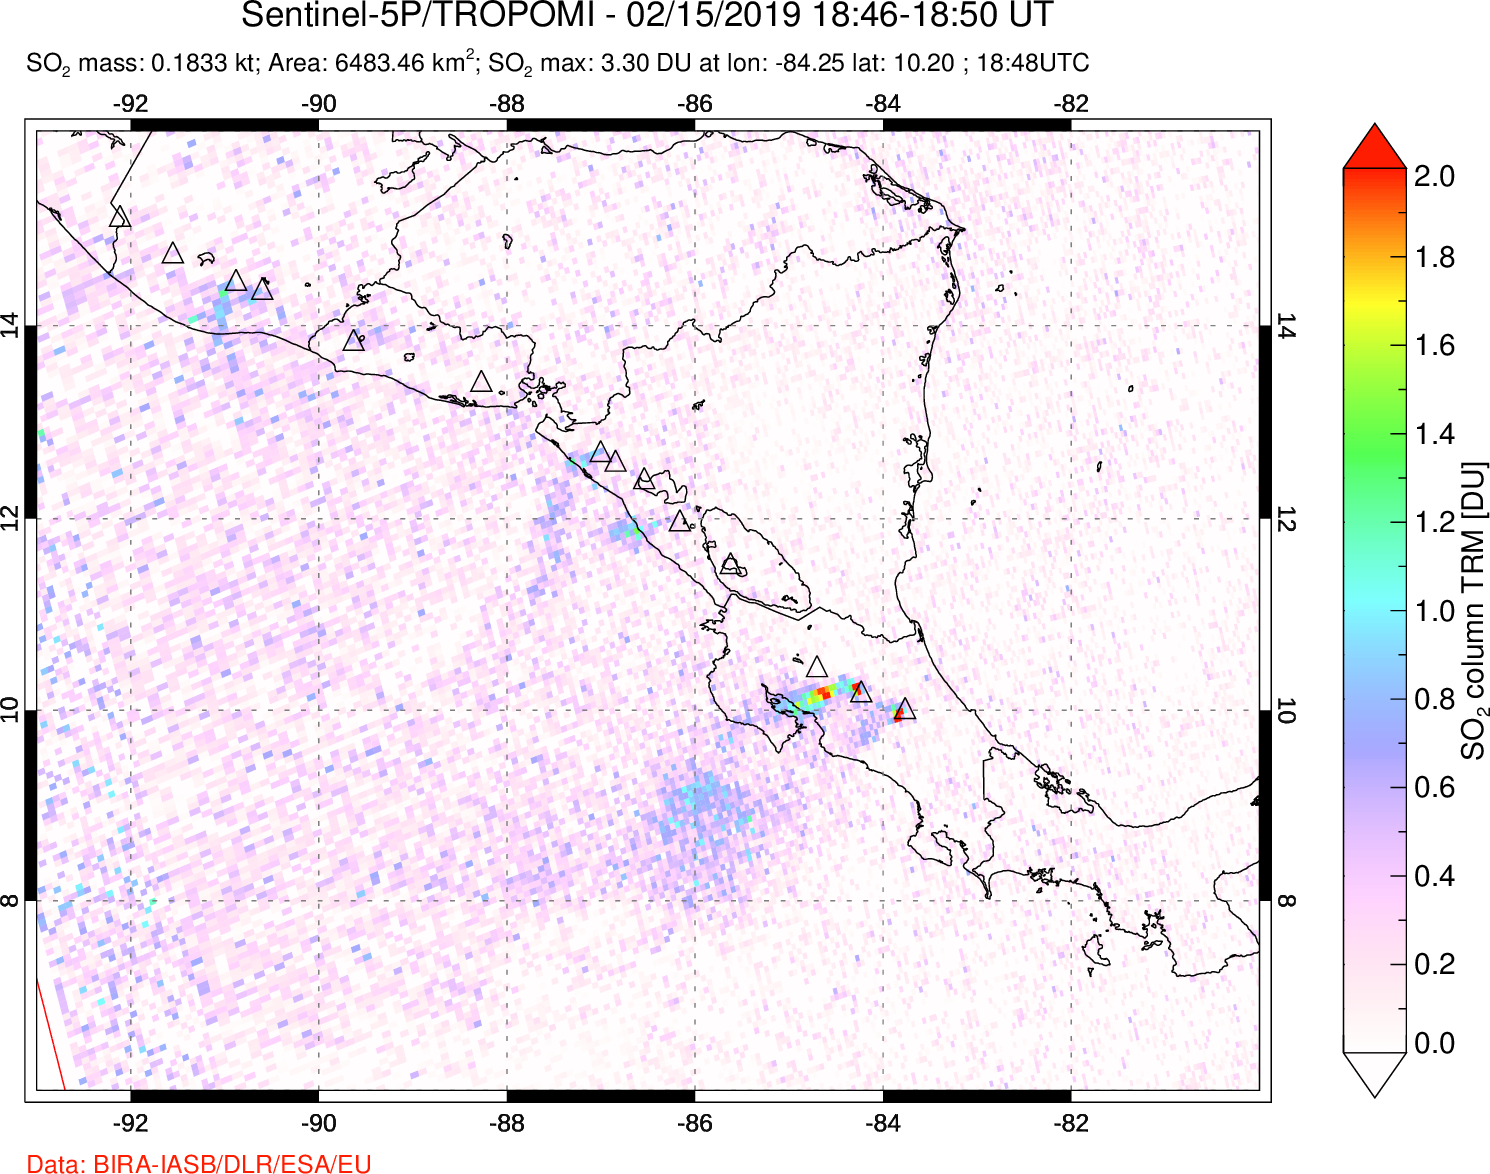 A sulfur dioxide image over Central America on Feb 15, 2019.